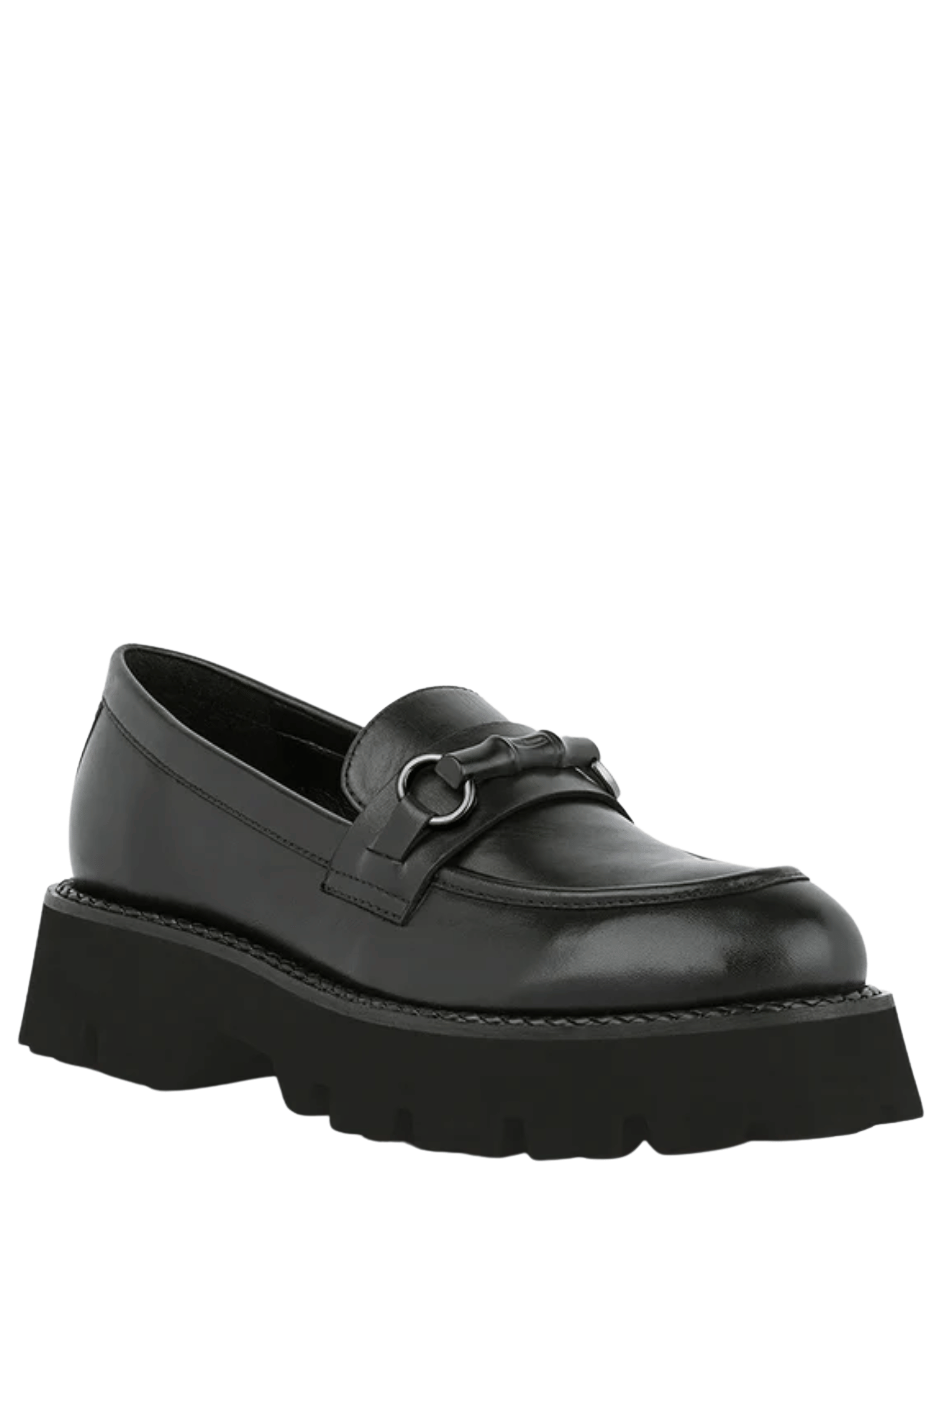 Cheviot Chunky Leather Loafers - Expressive Collective CO.